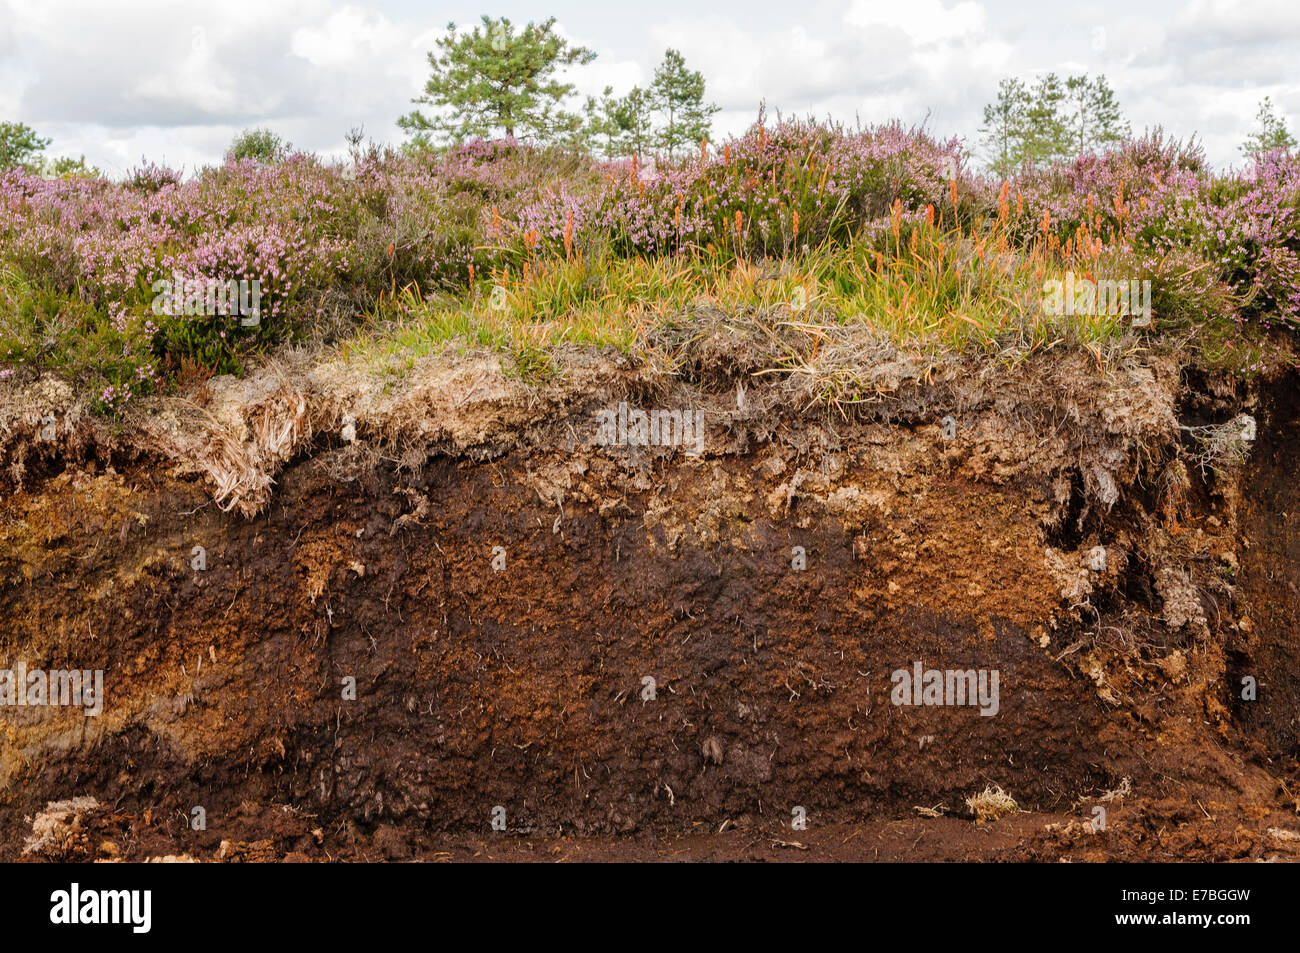 Cross-section of an Irish peat bog showing heather and plants on top Stock Photo